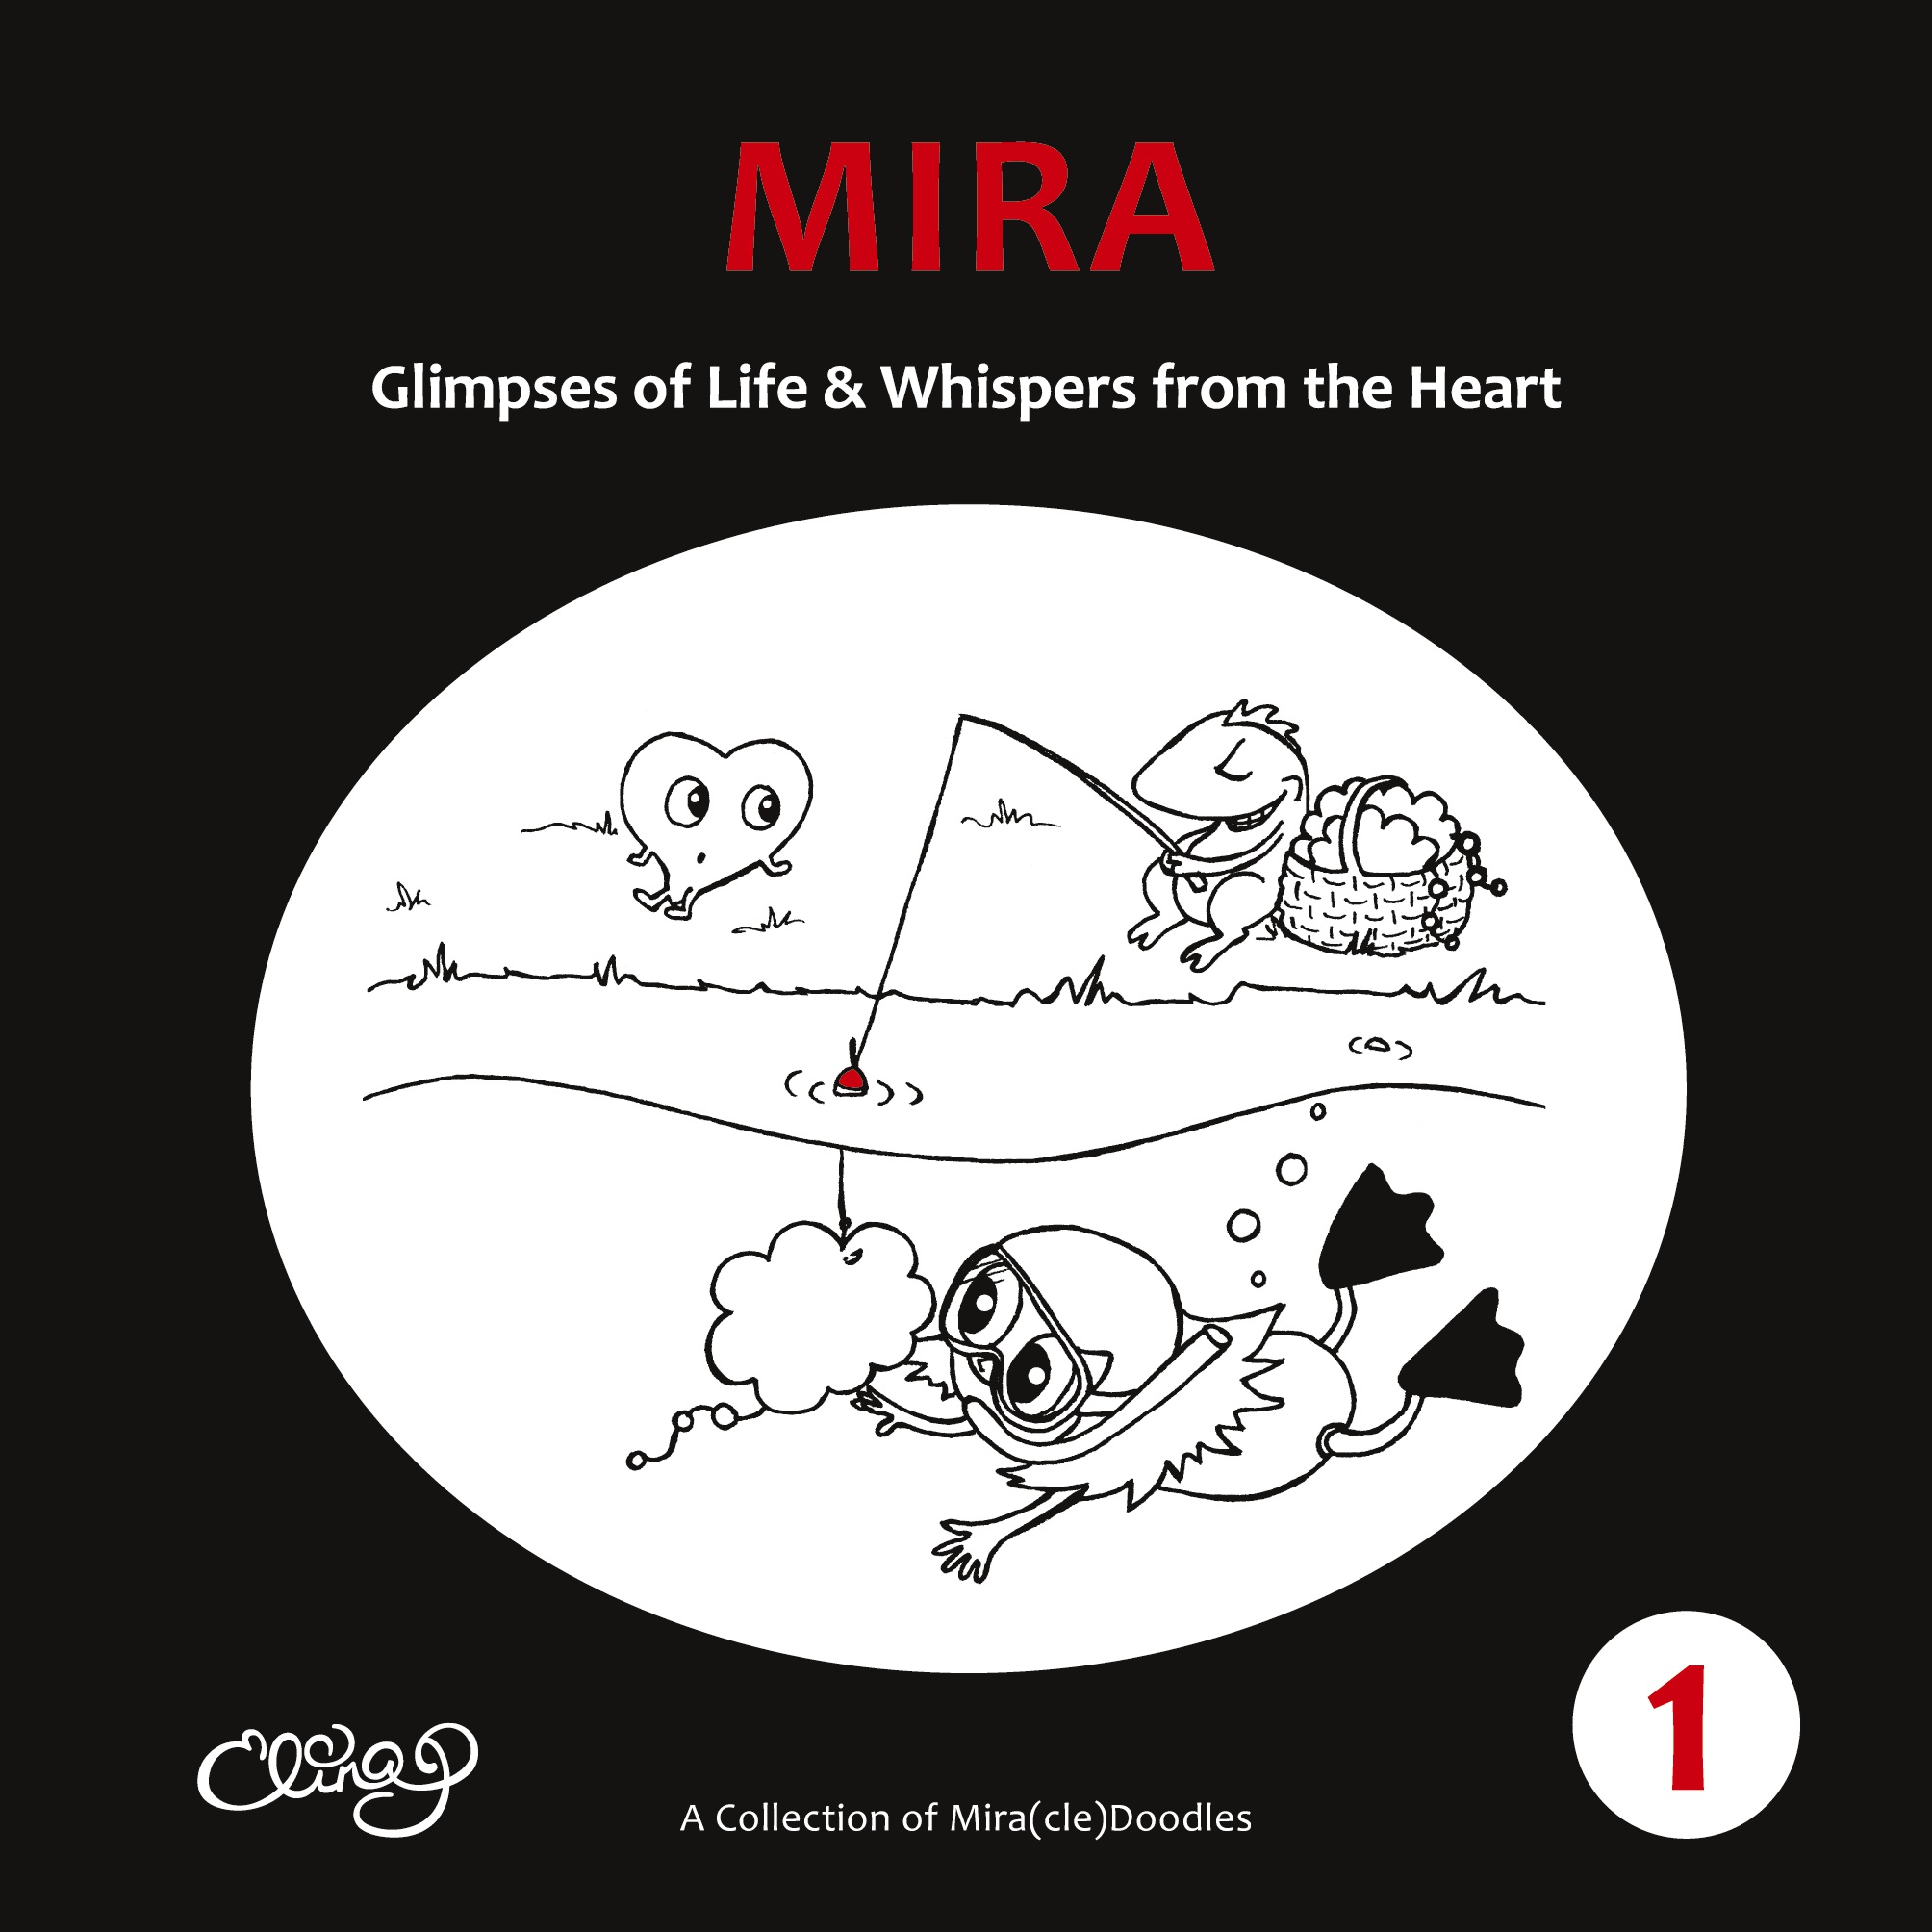 MIRA - Glimpses of Life & Whispers from the Heart